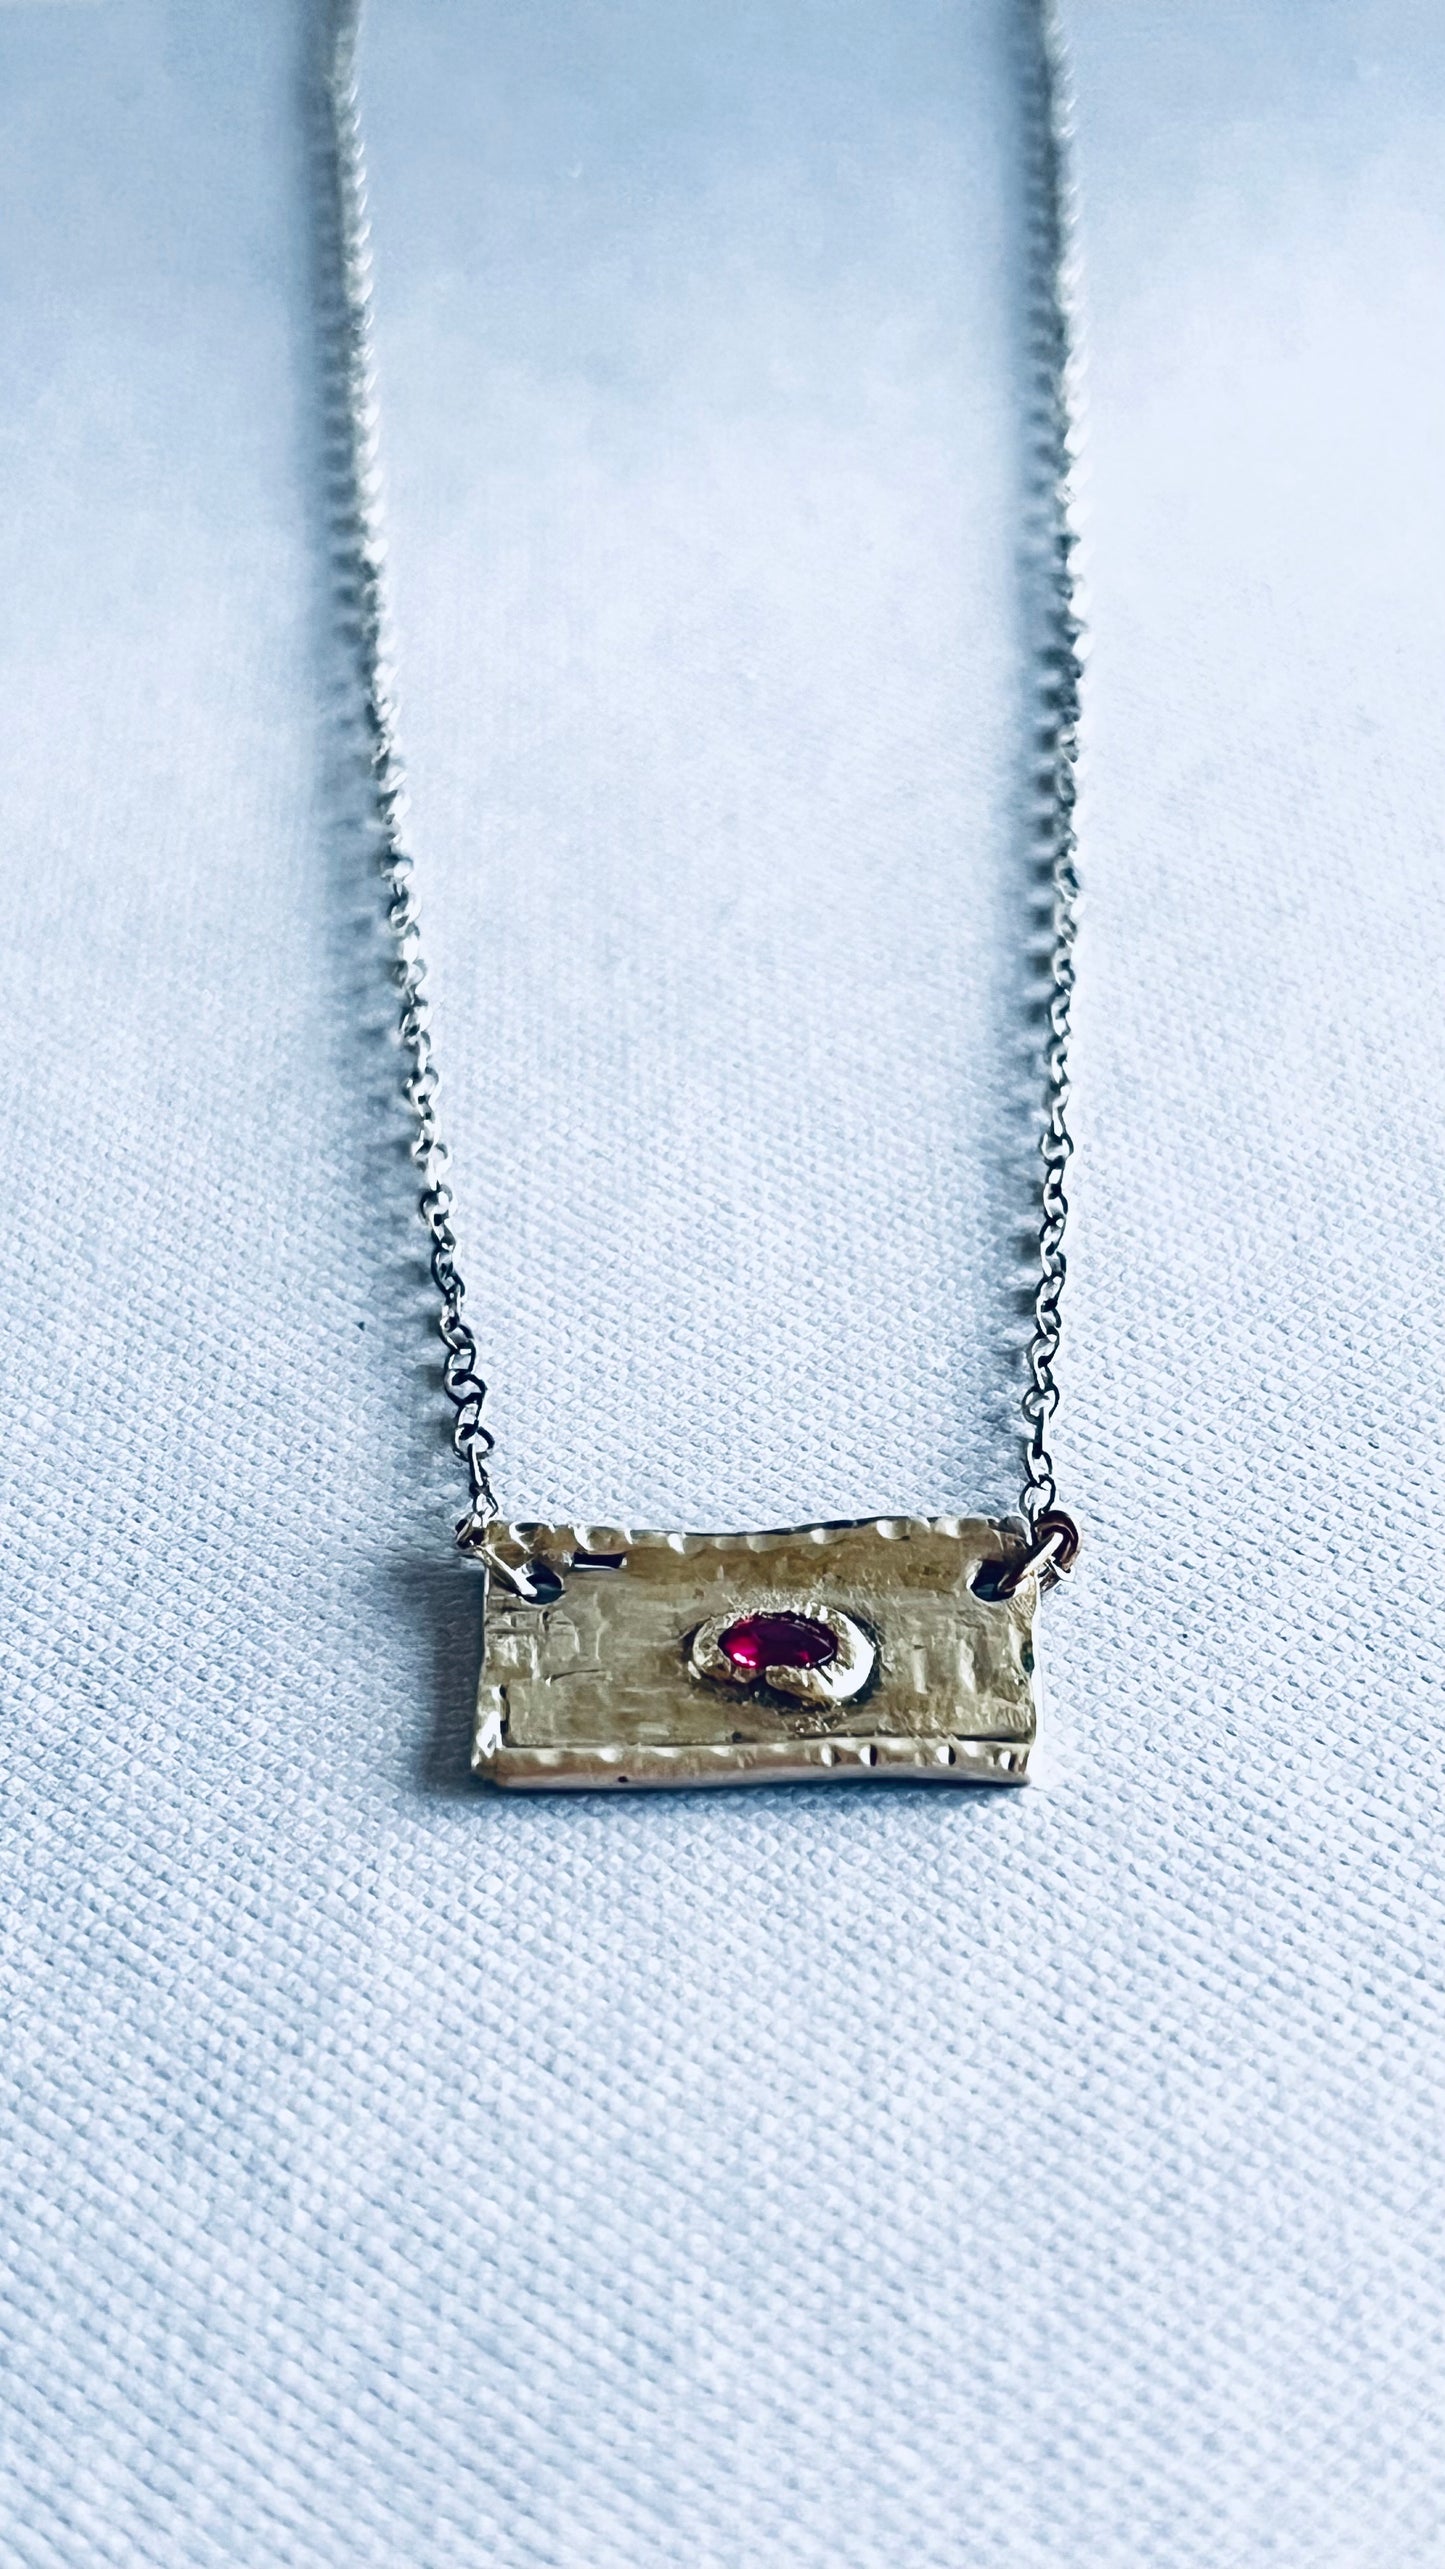 Ruby stone necklace